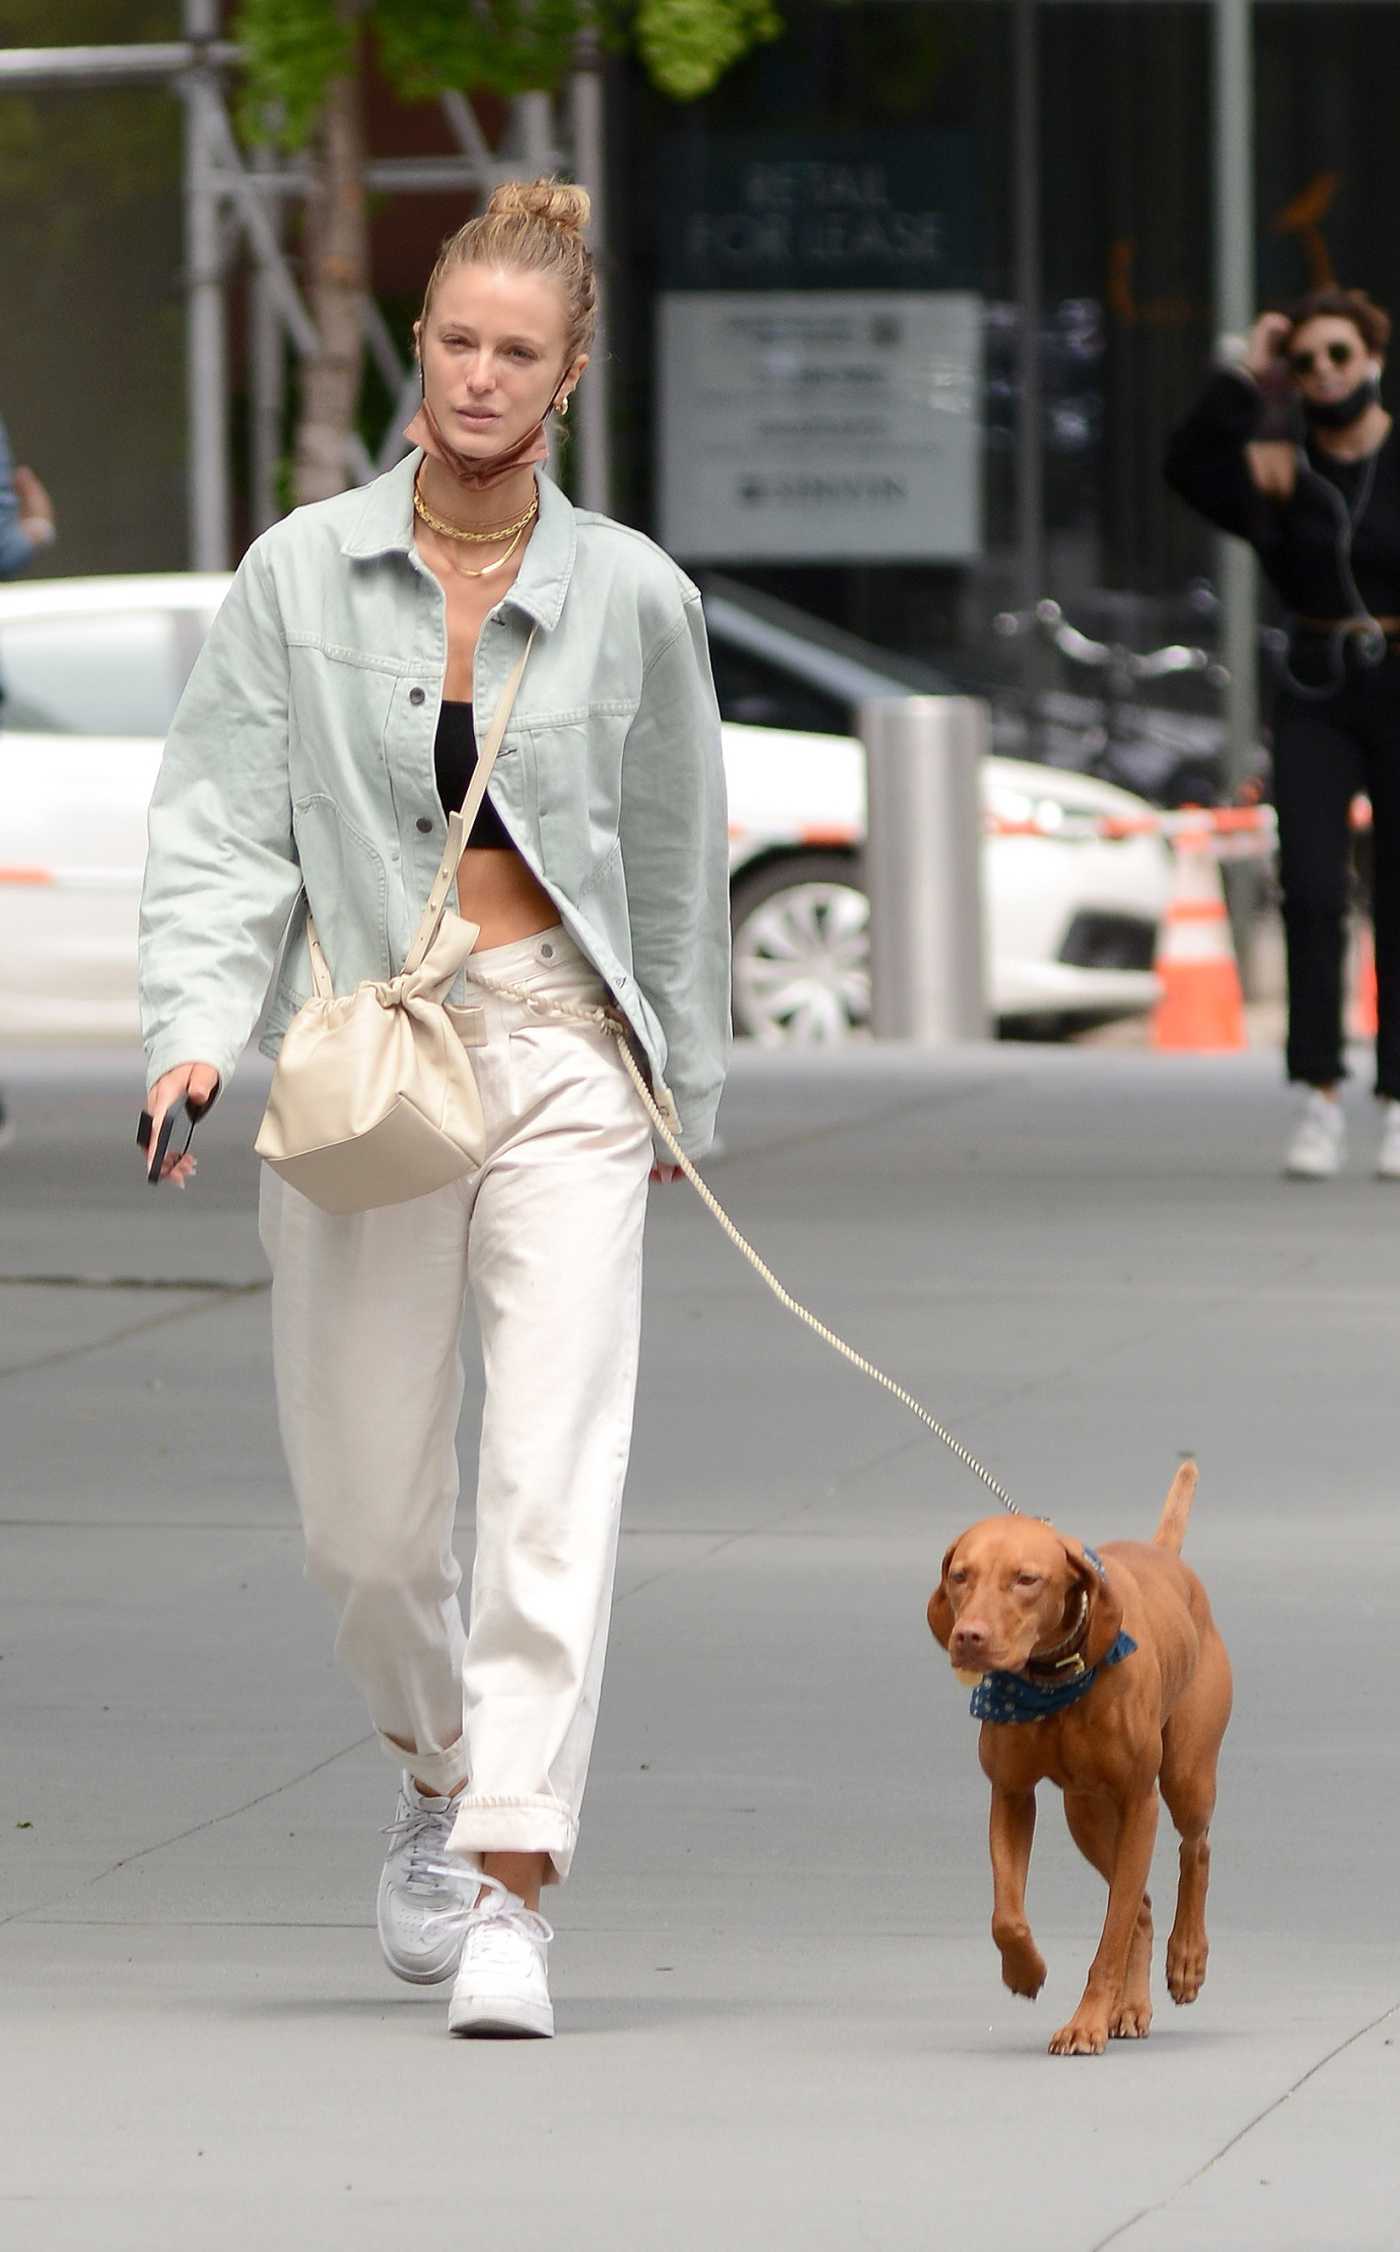 Kate Bock in a White Sneakers Walks Her Dog in New York 05/18/2021